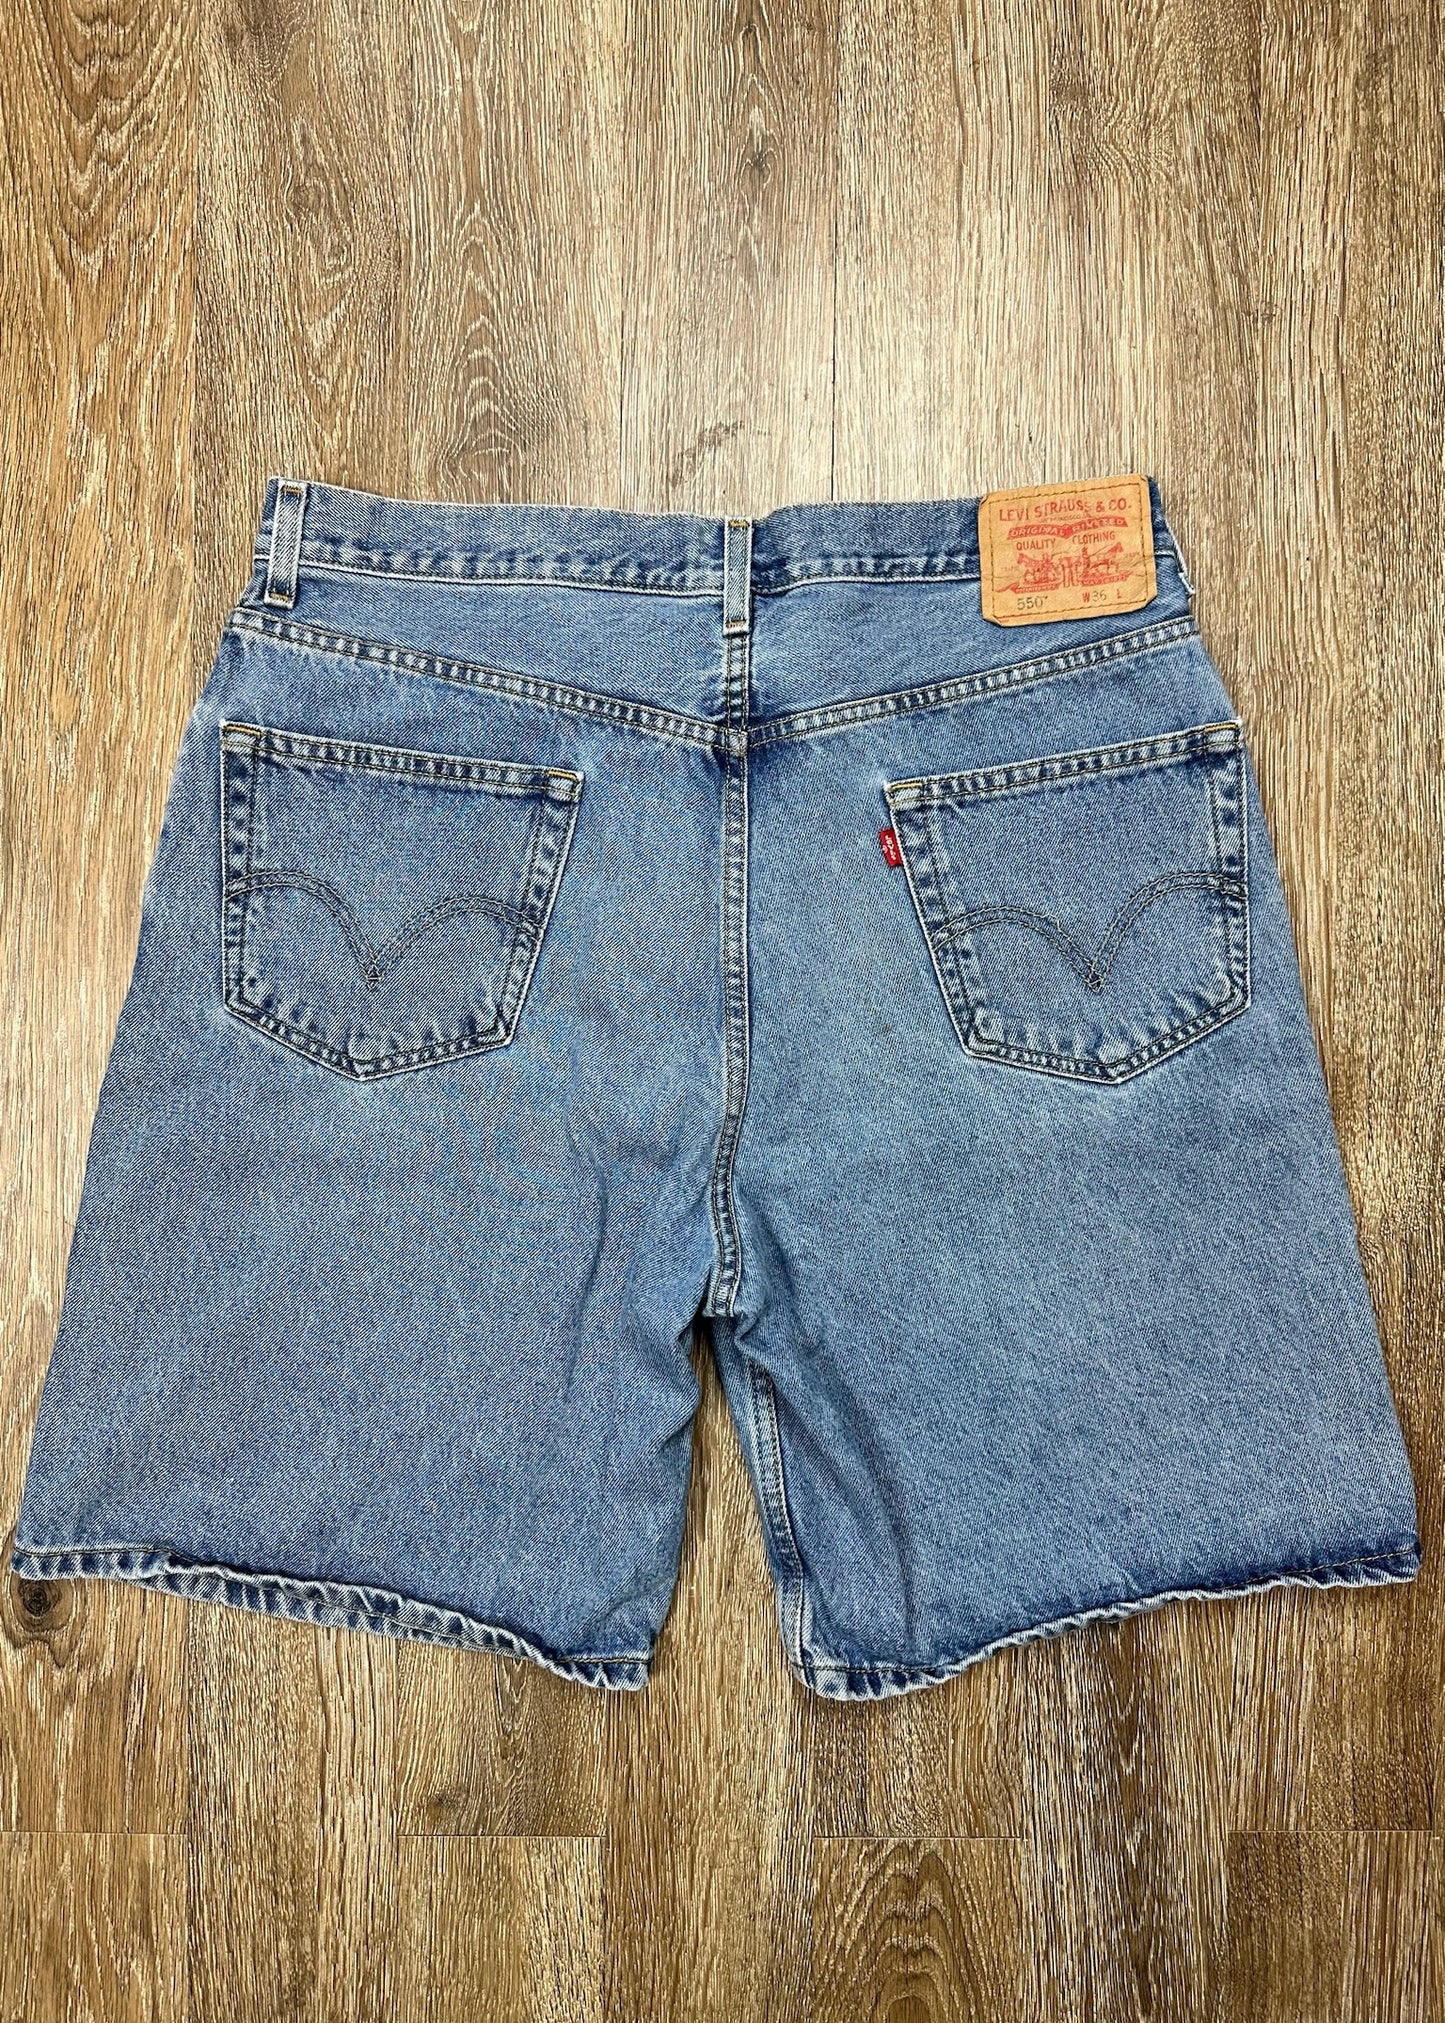 Levi’s 550 Vintage Relaxed Fit Denim Shorts